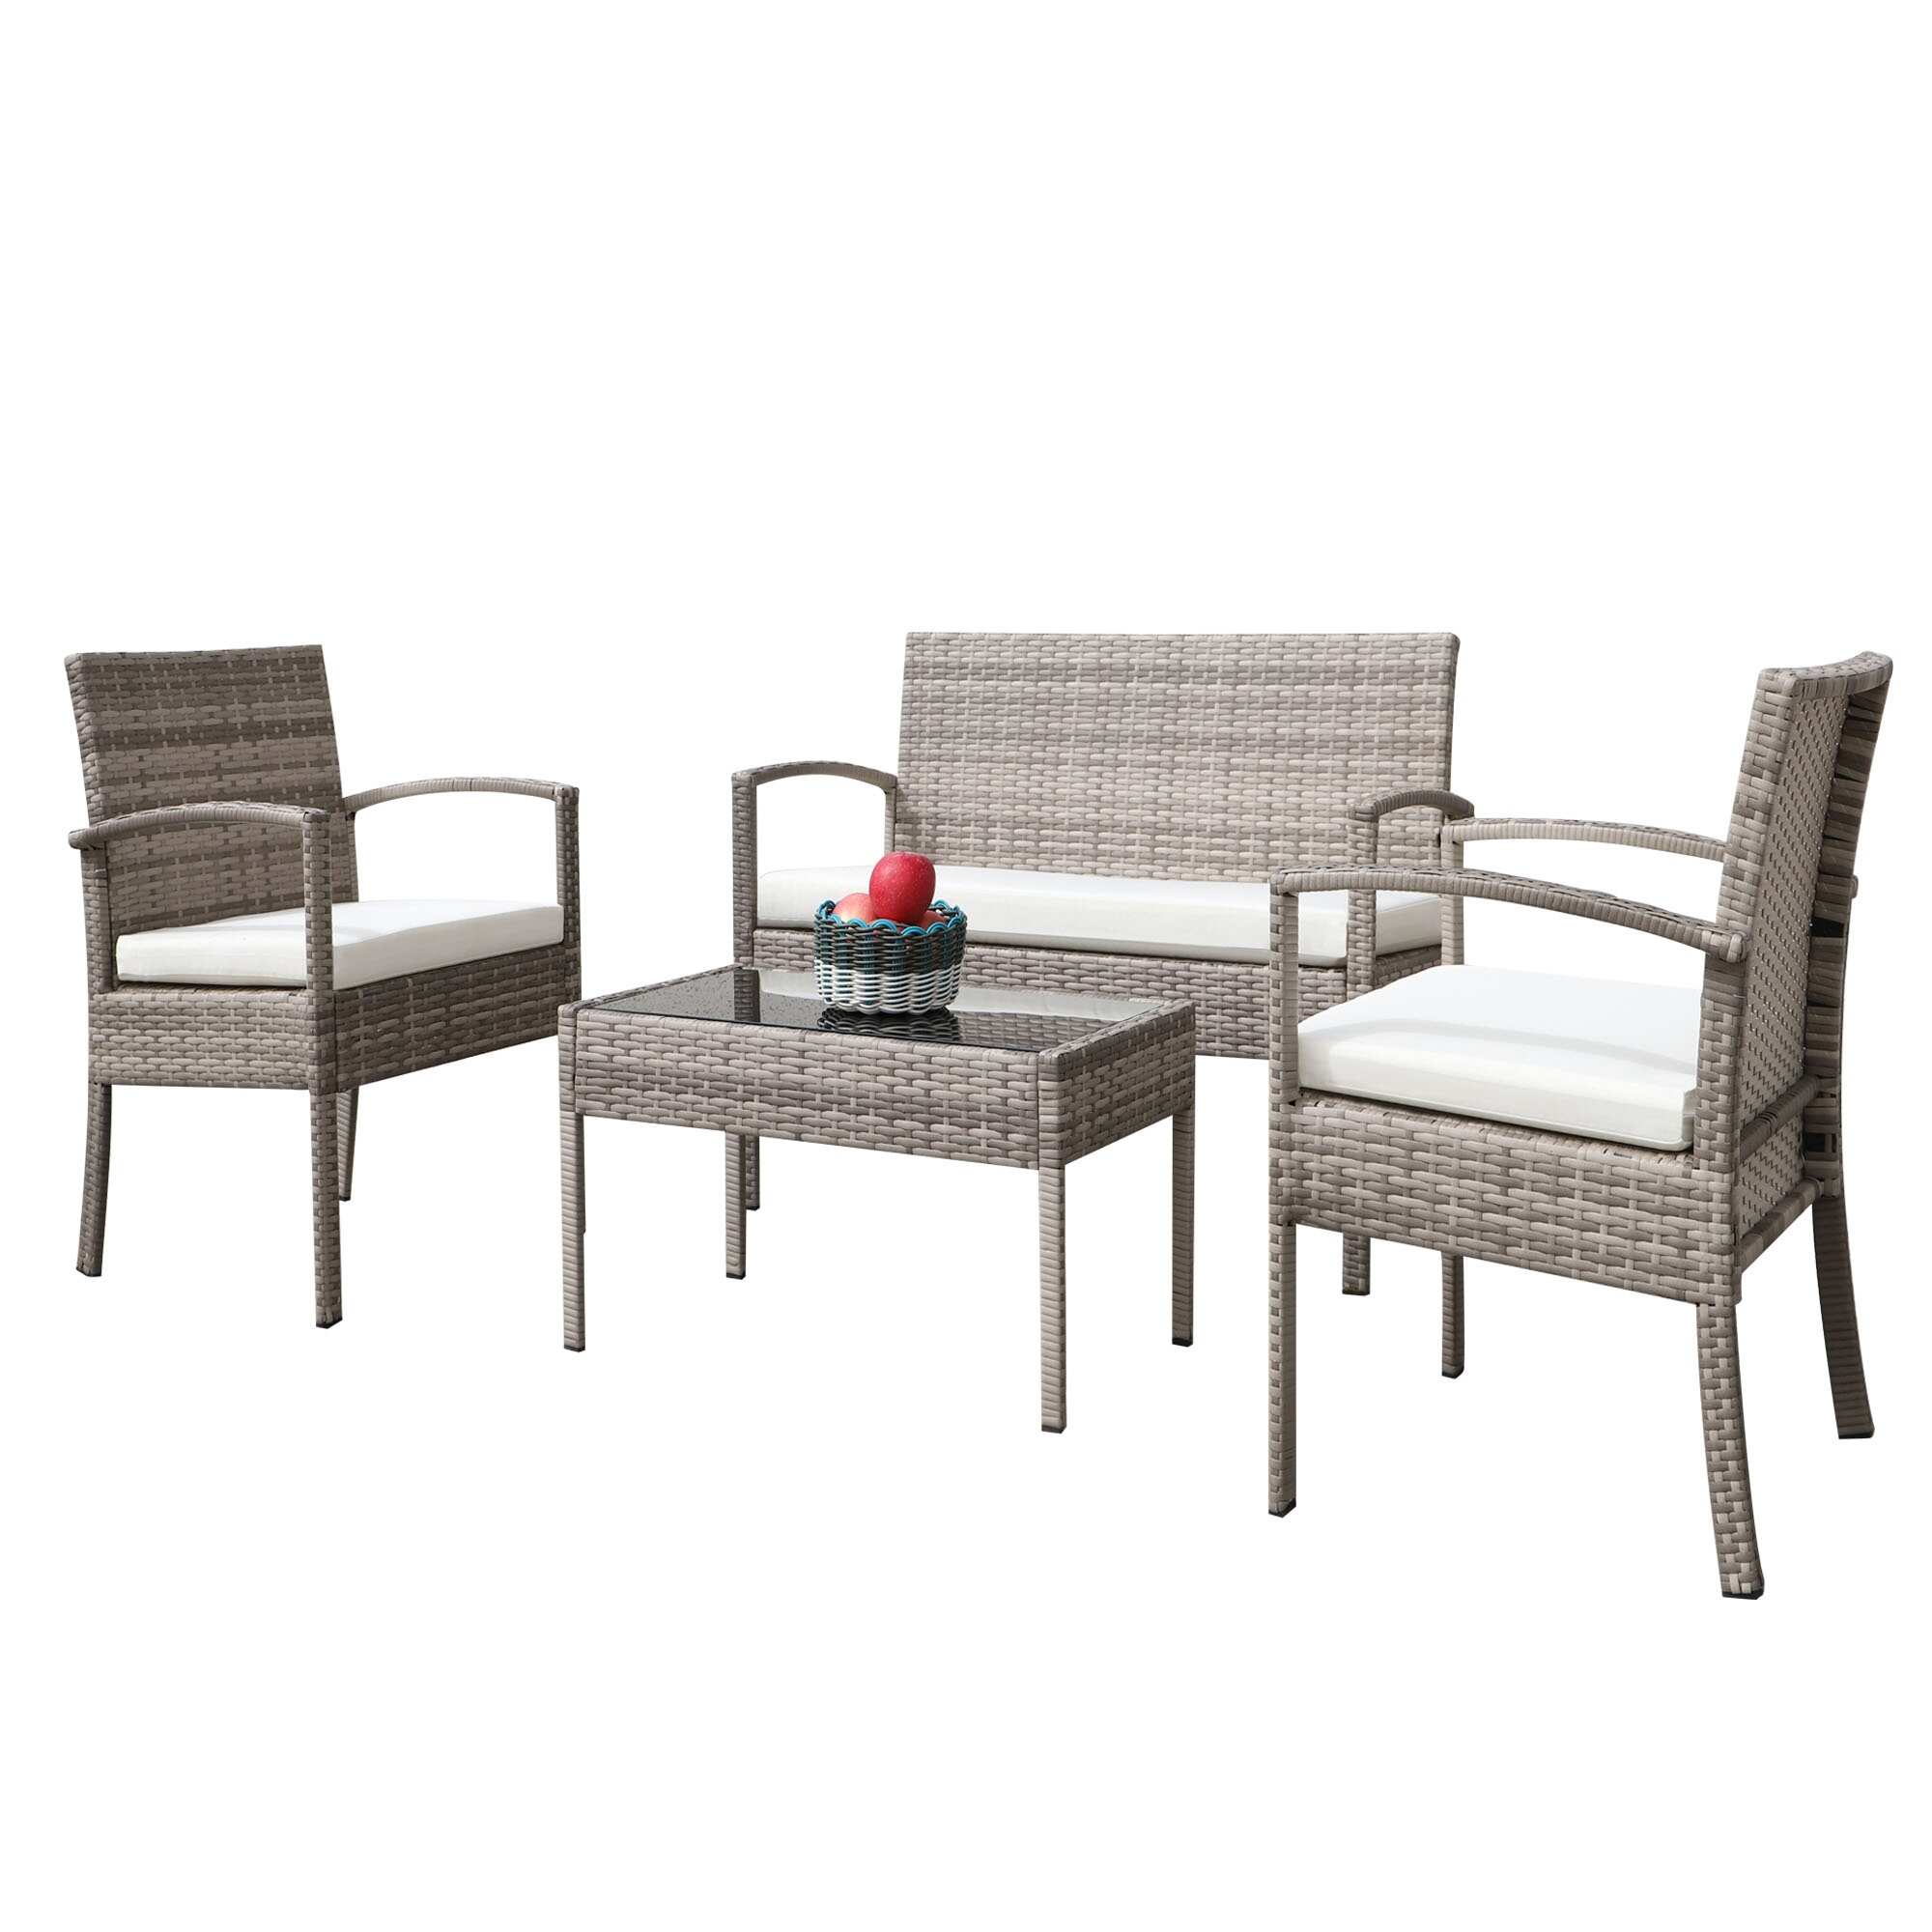 Beige Outdoor Rattan Sofa Set, Space-Saving, Lightweight, and Durable for Indoor and Outdoor Use